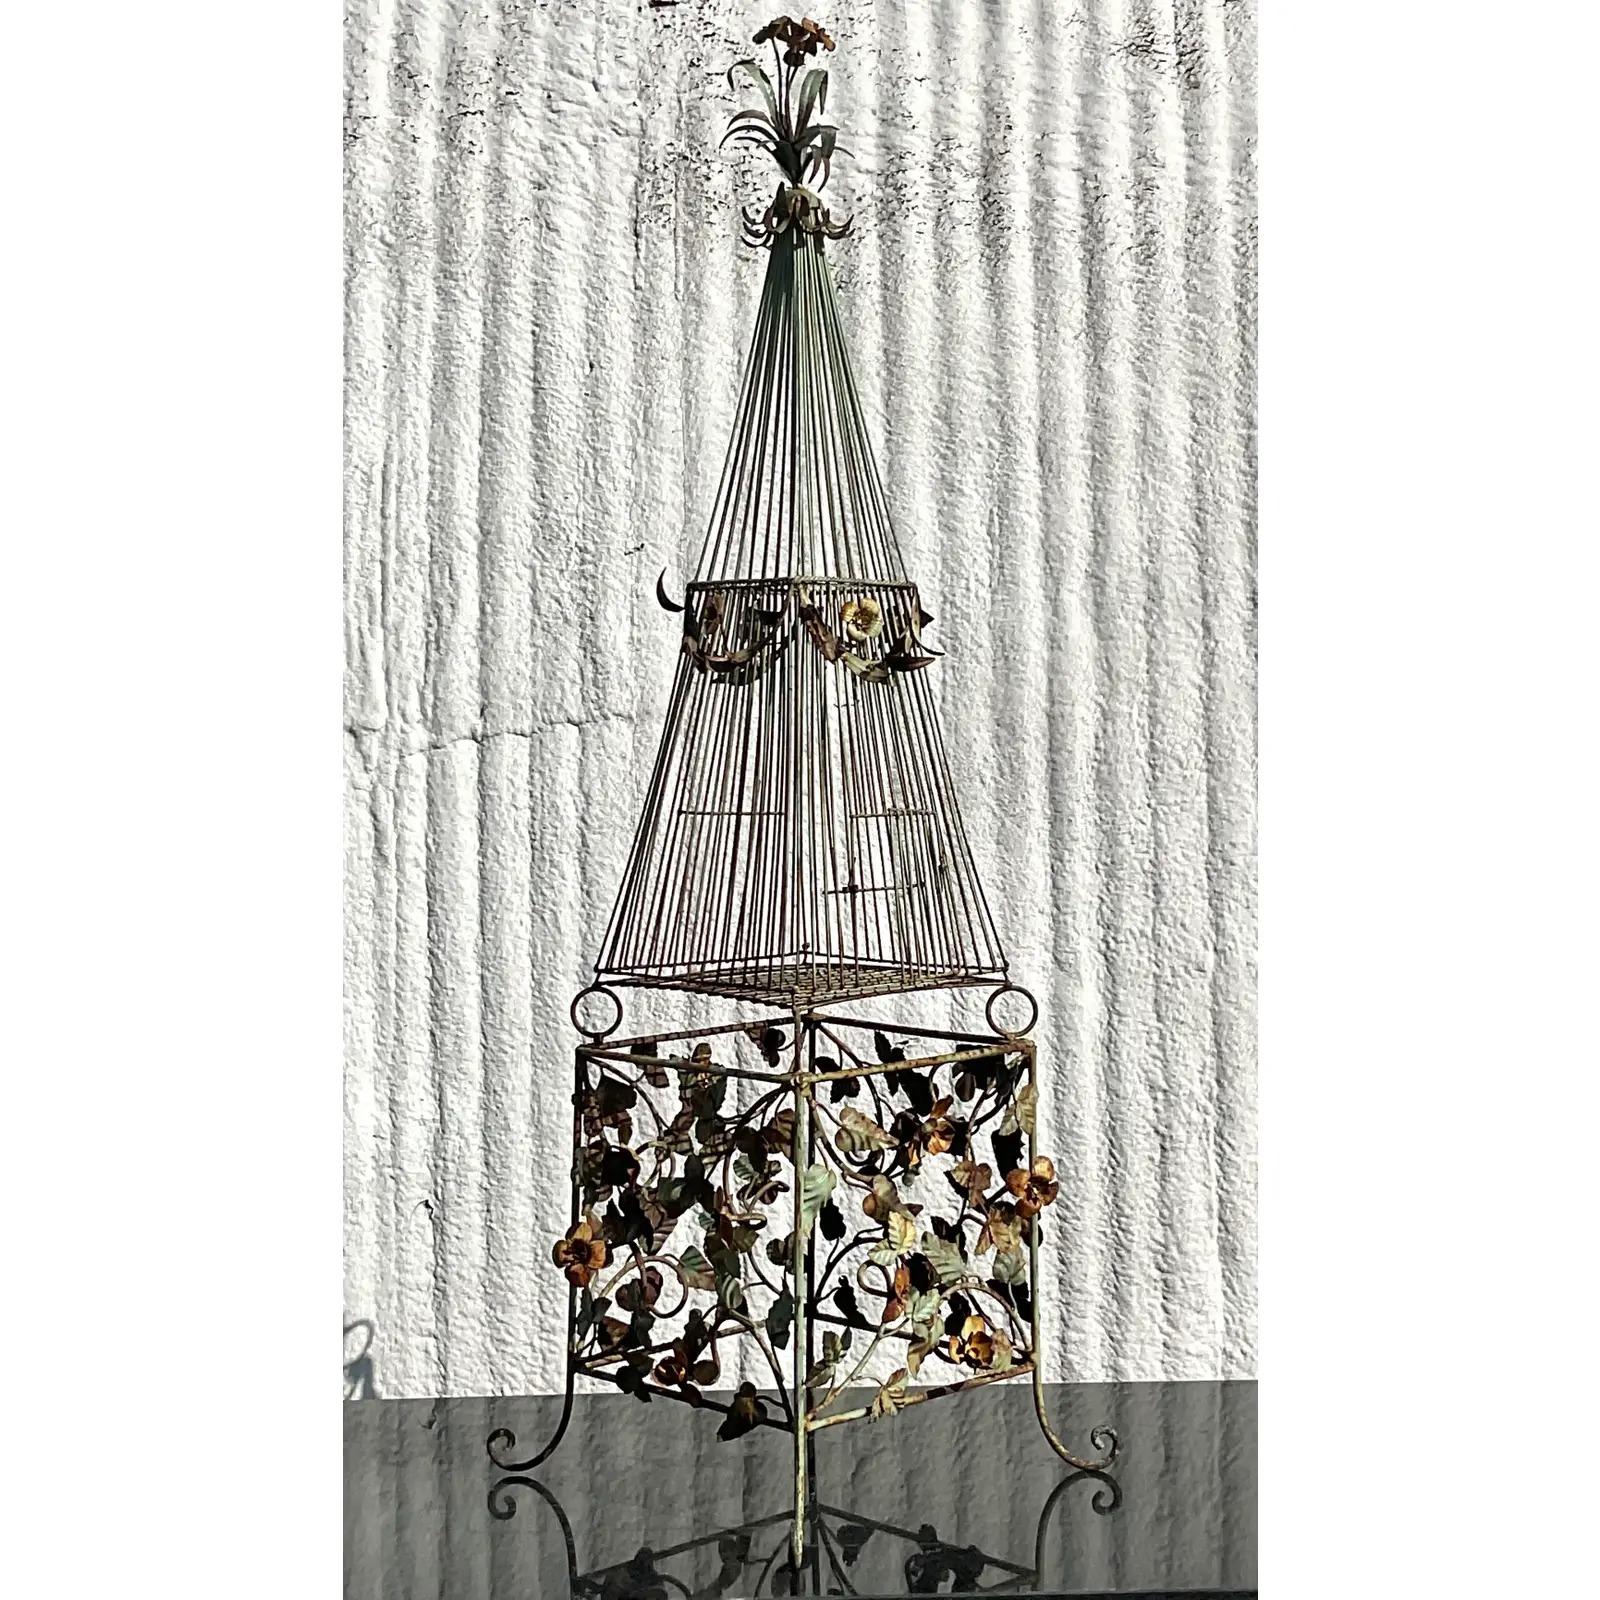 An incredible vintage Regency birdcage. Wrought iron frame with beautiful attention to detail. All over floating flowers and vintage. Gorgeous patina from time gives it a real period look. Acquired from a Palm Beach estate.

The birdcage is in great